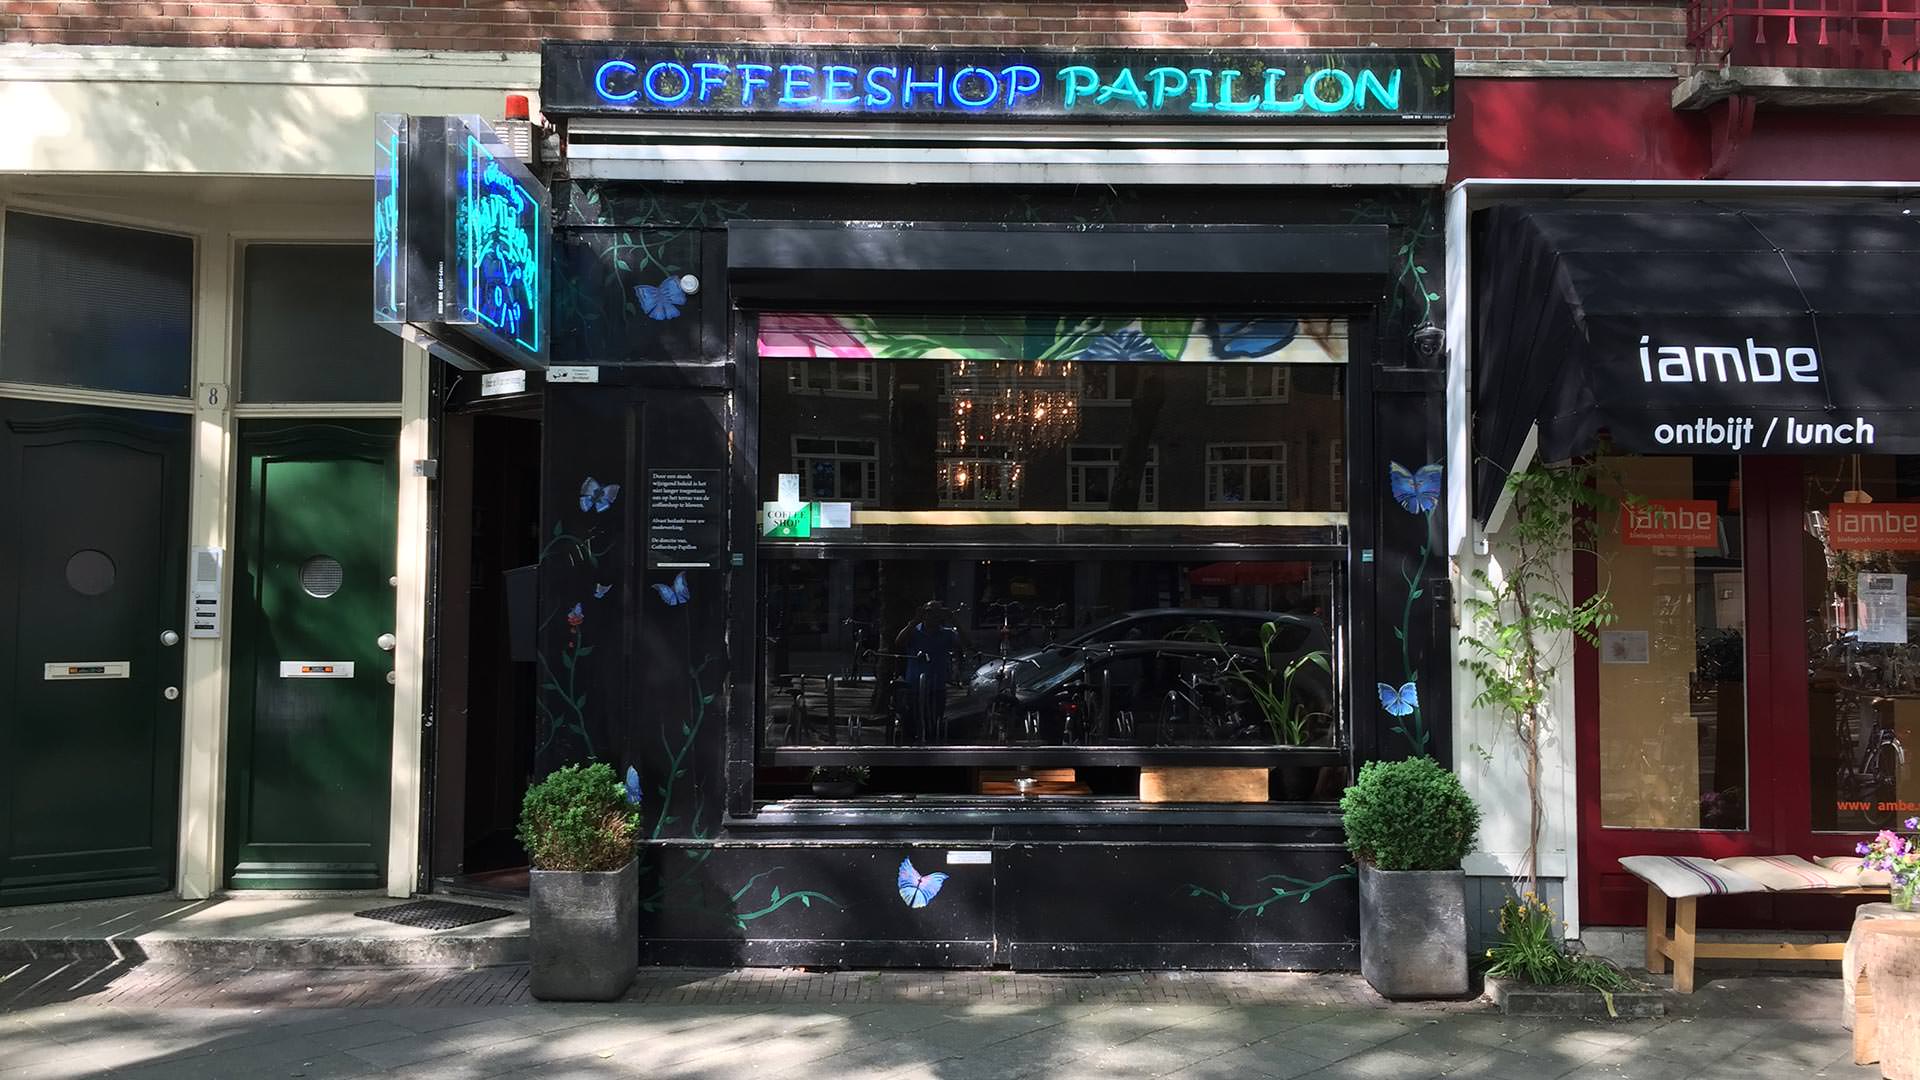 Papillon Coffeeshop Amsterdam - Weed Recommend